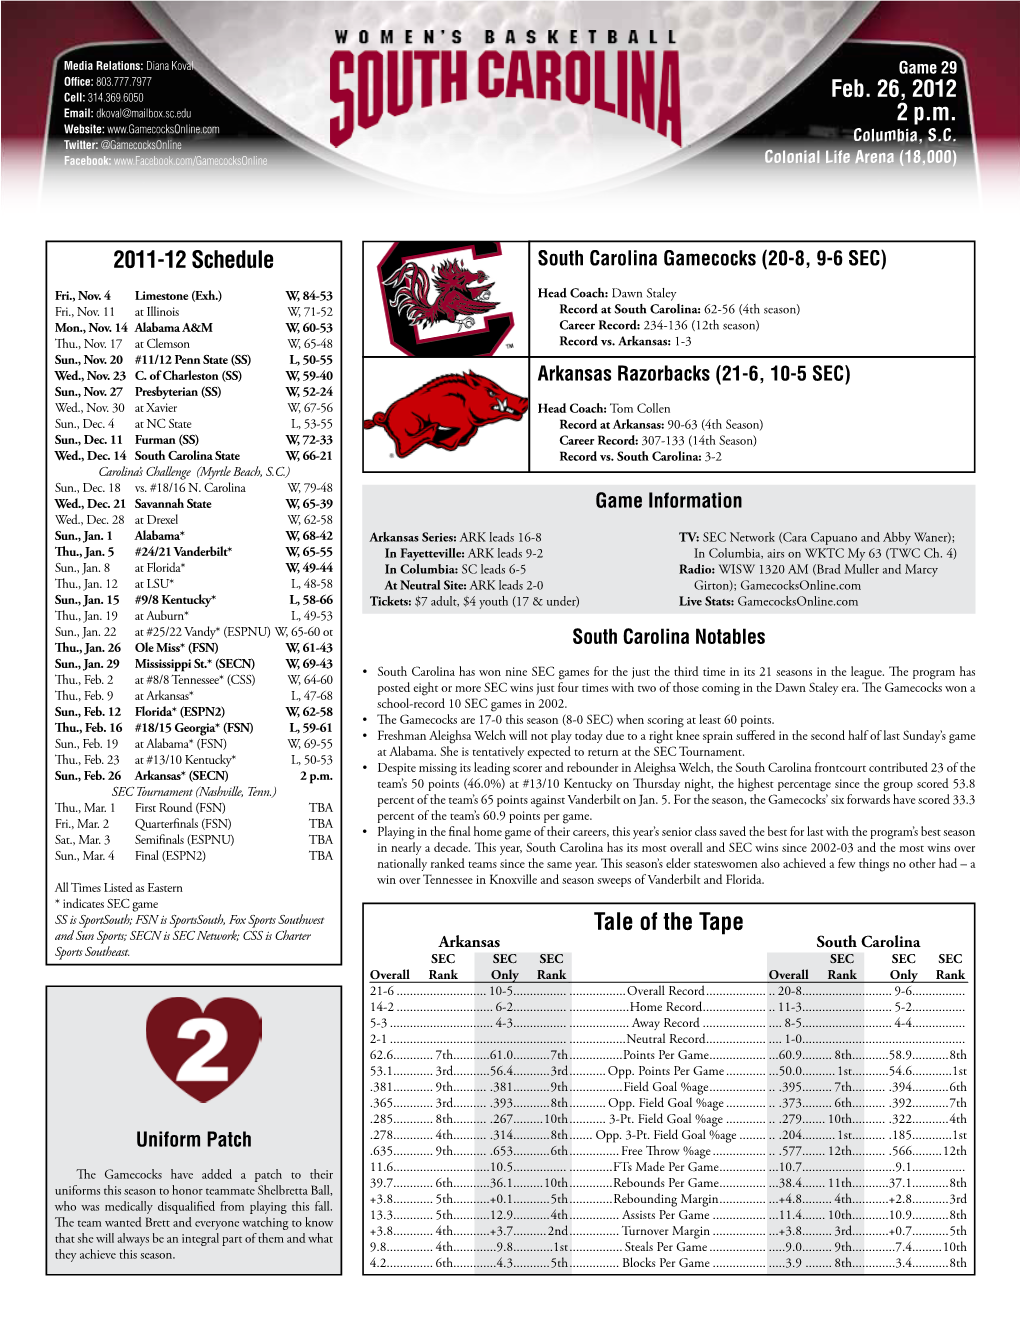 Tale of the Tape Feb. 26, 2012 2 P.M. 2011-12 Schedule